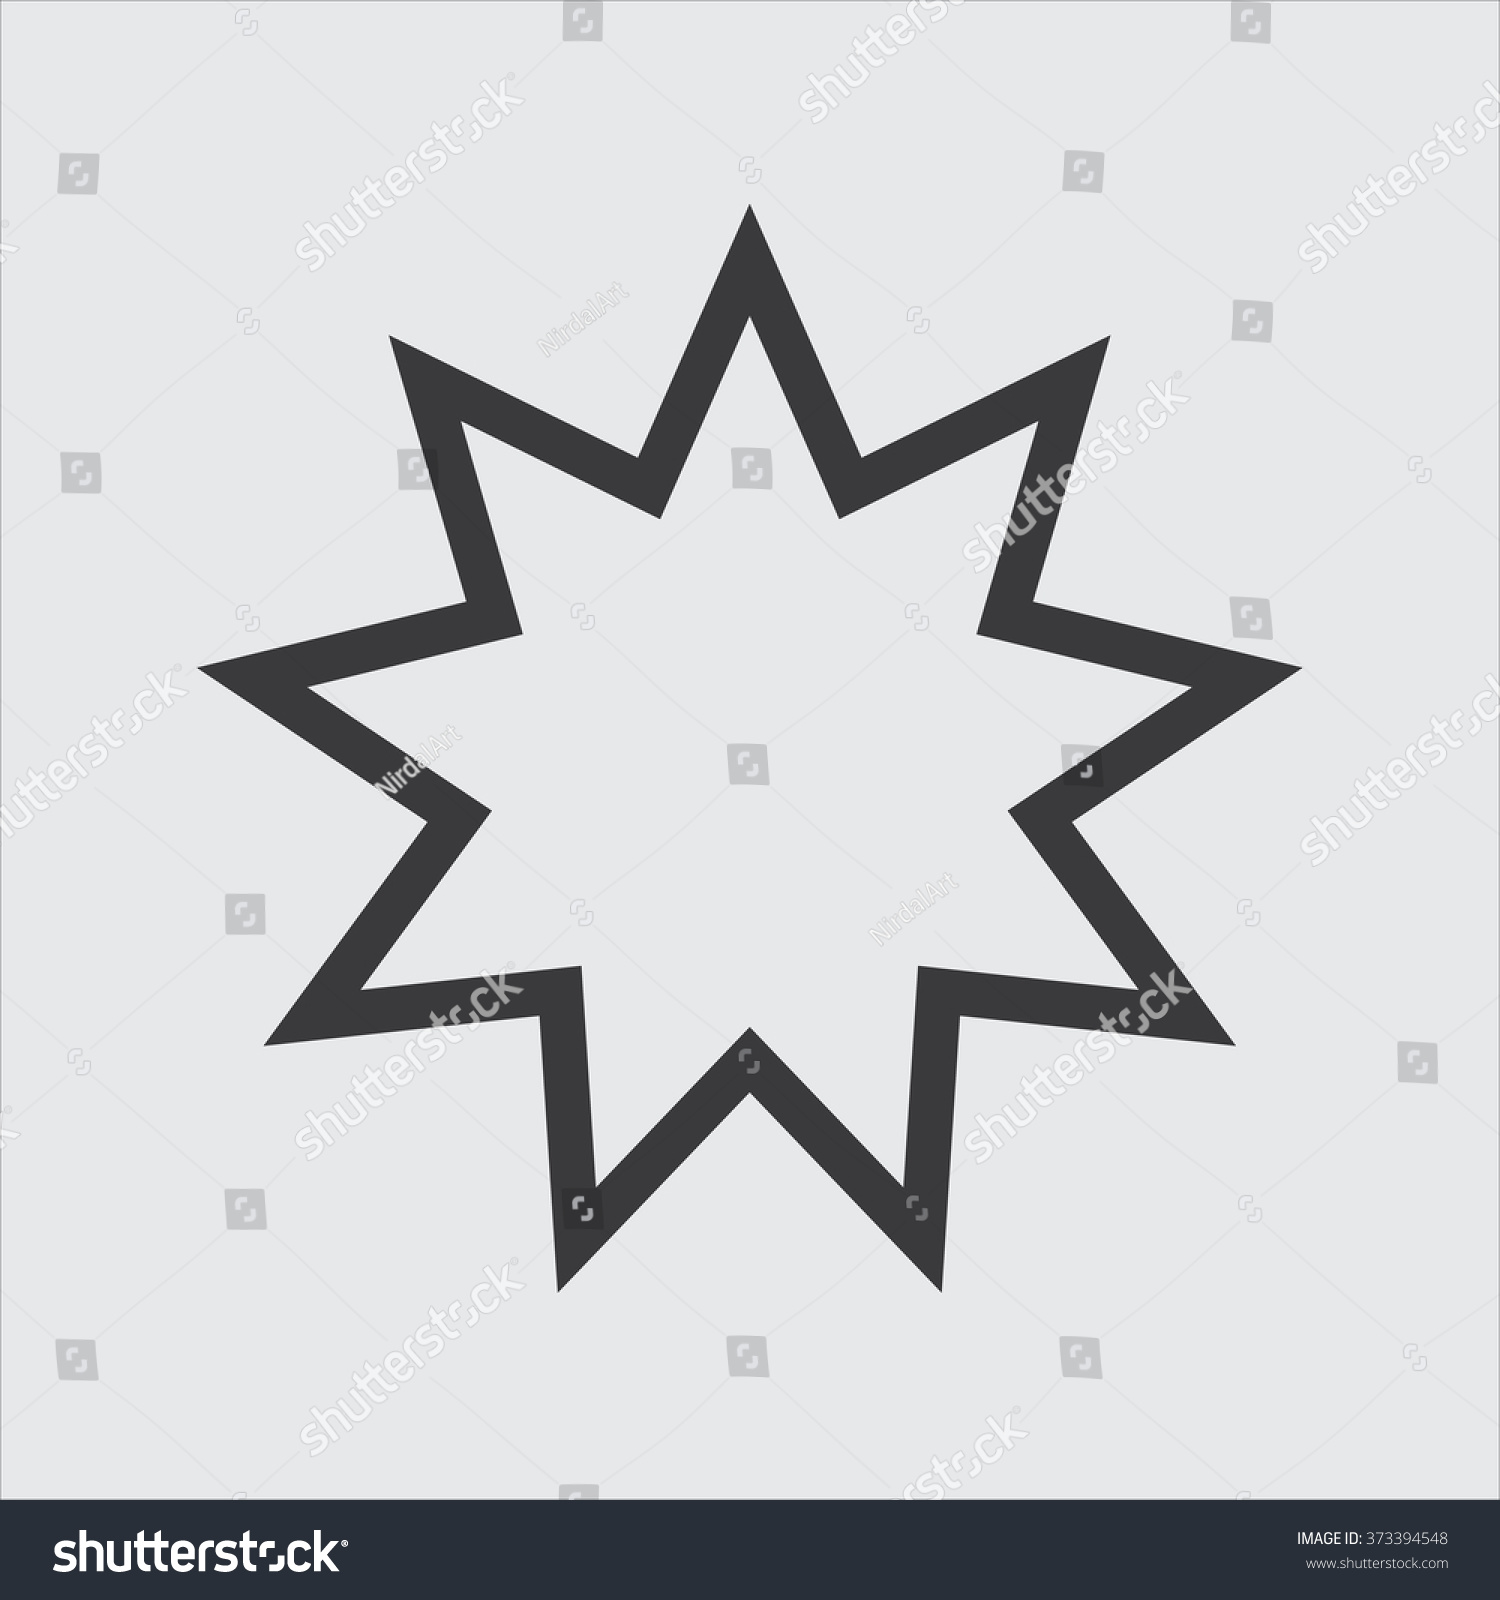 SVG of Nine pointed star - Symbol of Bahai Faith / Bahaism flat icon for apps and websites svg